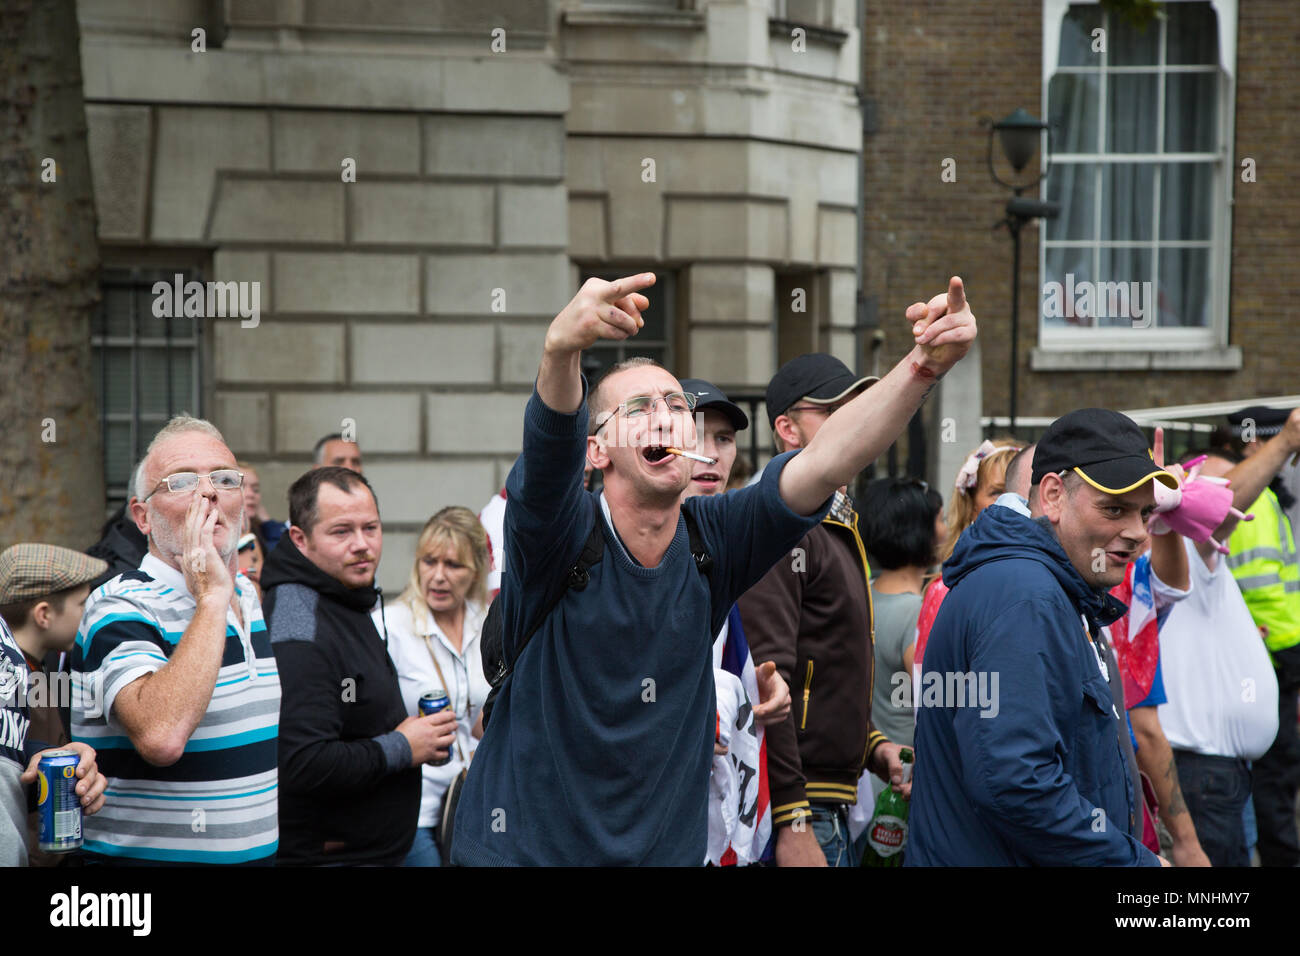 A man sticks his fingers up at opposing crowds during an EDL demonstration Stock Photo